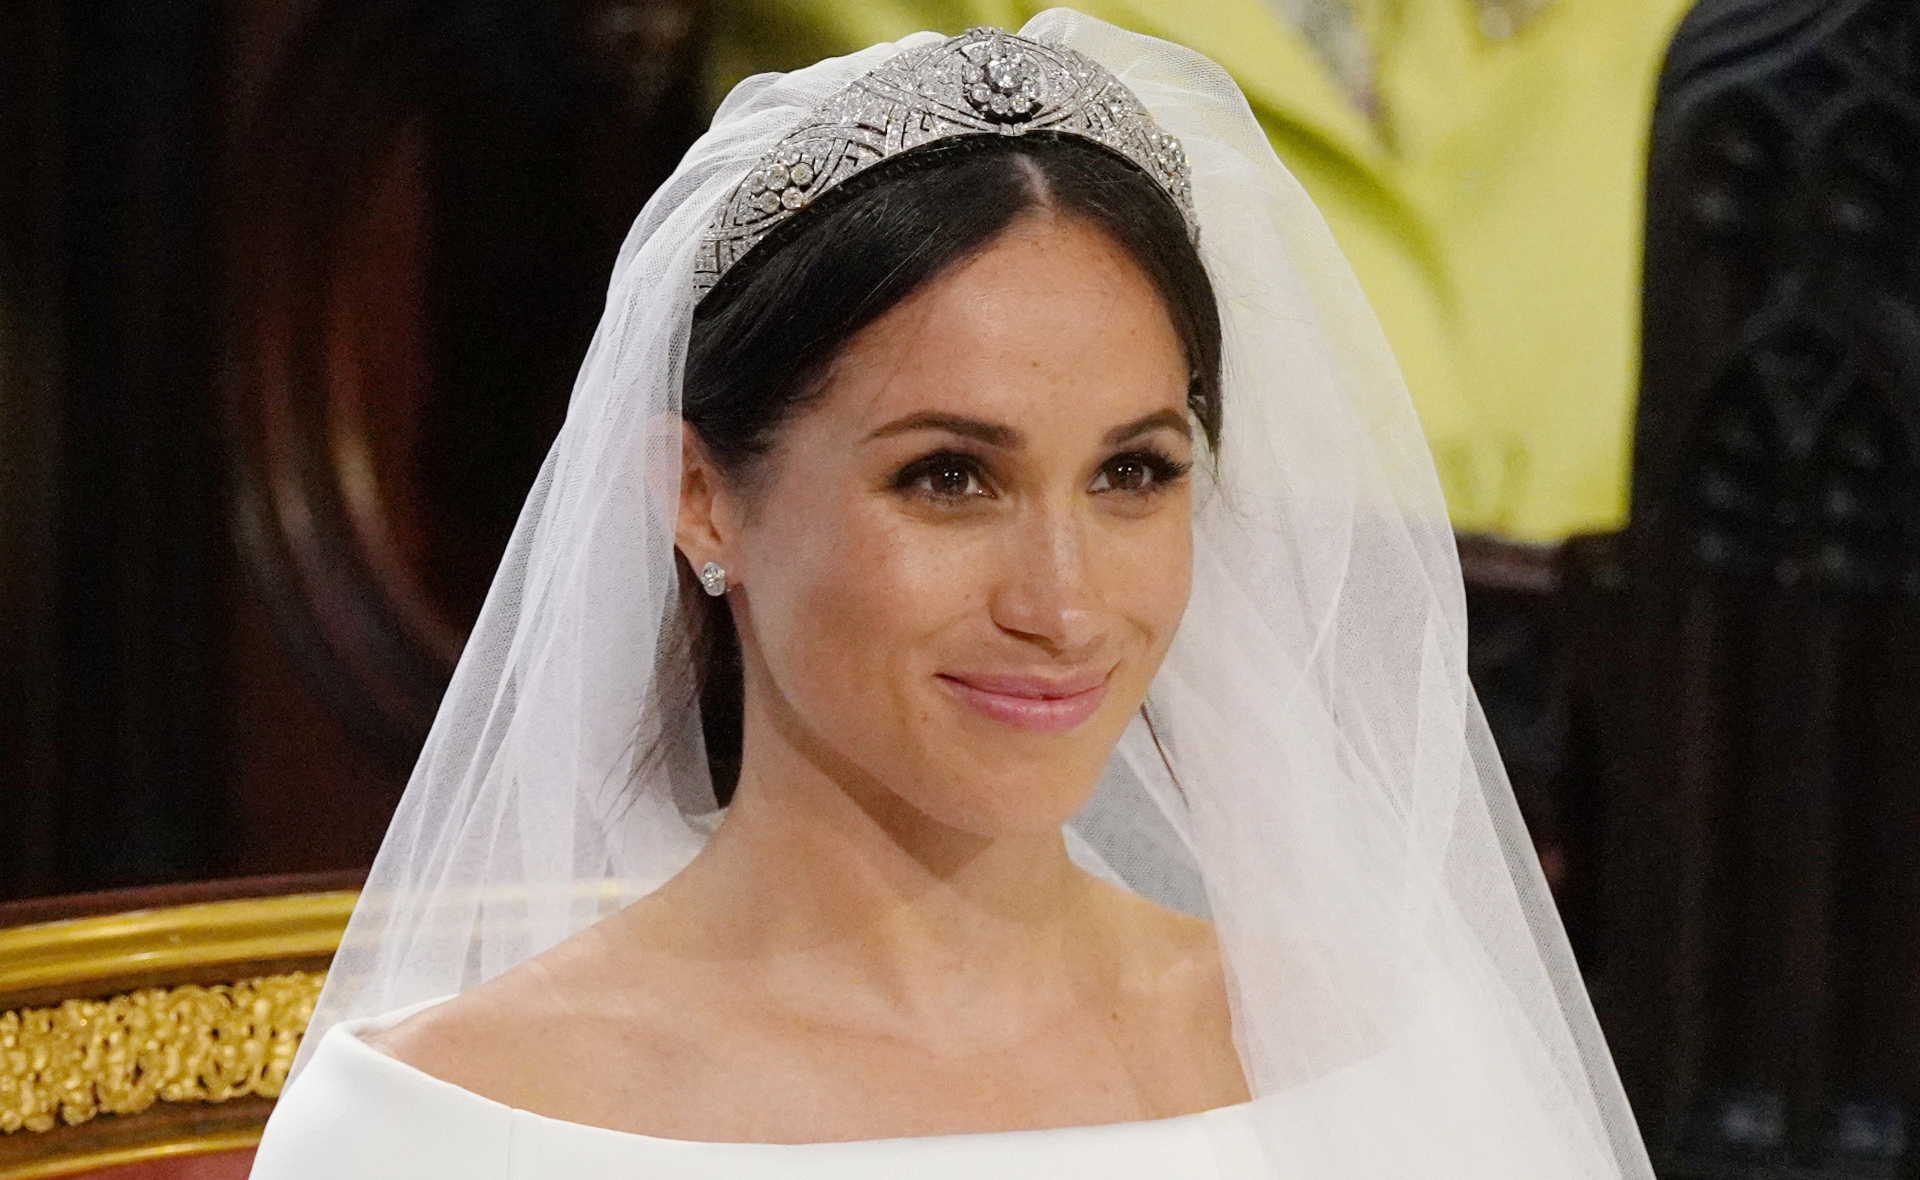 The Top Secret (And Unexpected) Royal Rules Of Wearing A Tiara